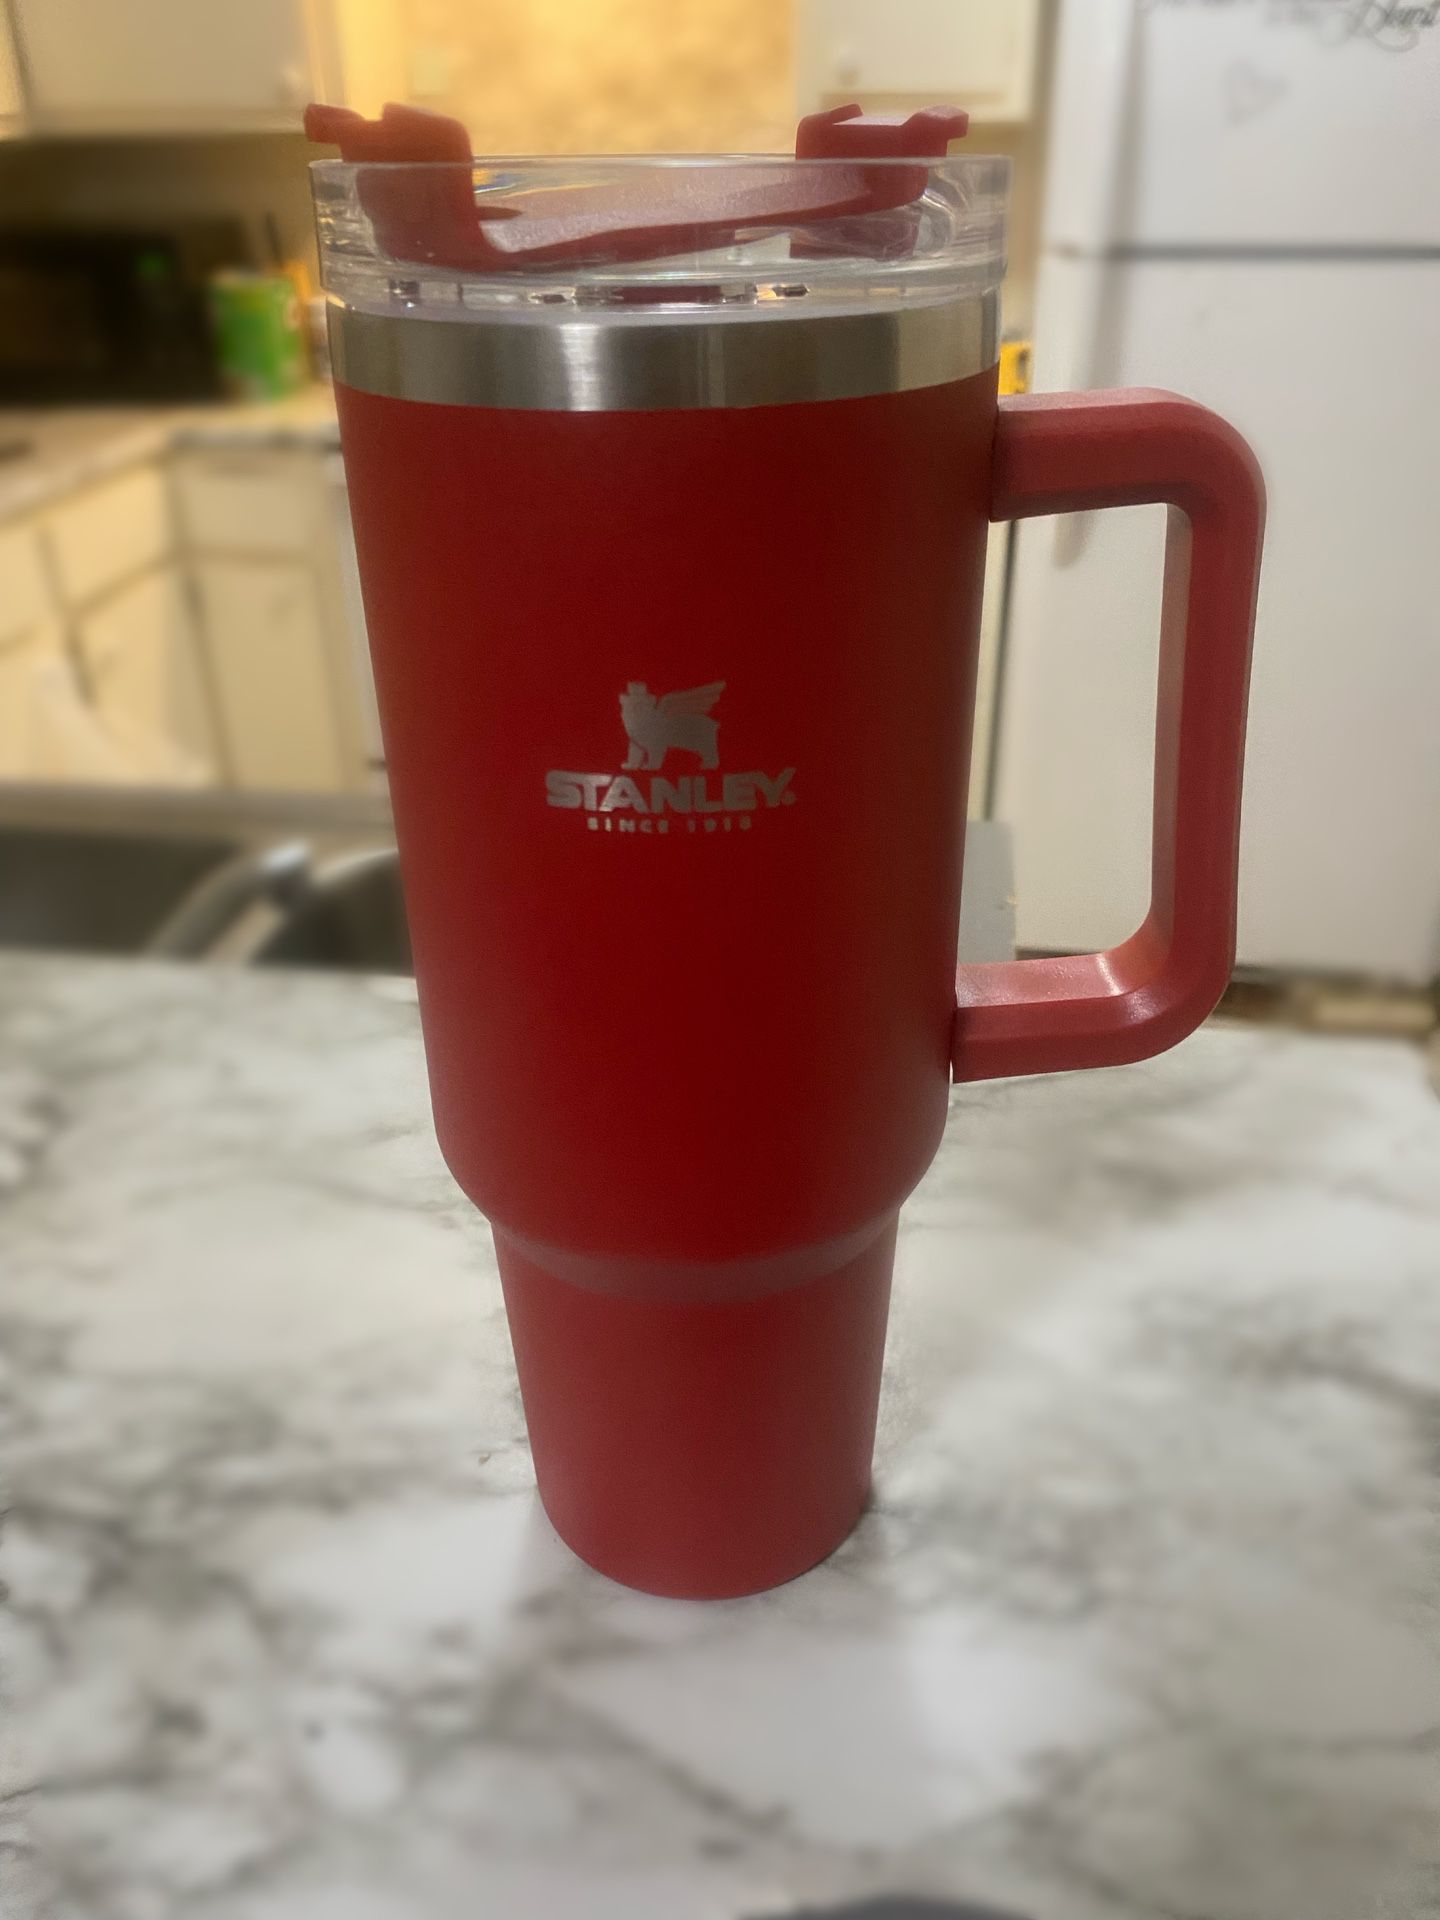 Stanley Adventure Quencher 40oz “Red Flame” Rare Find for Sale in